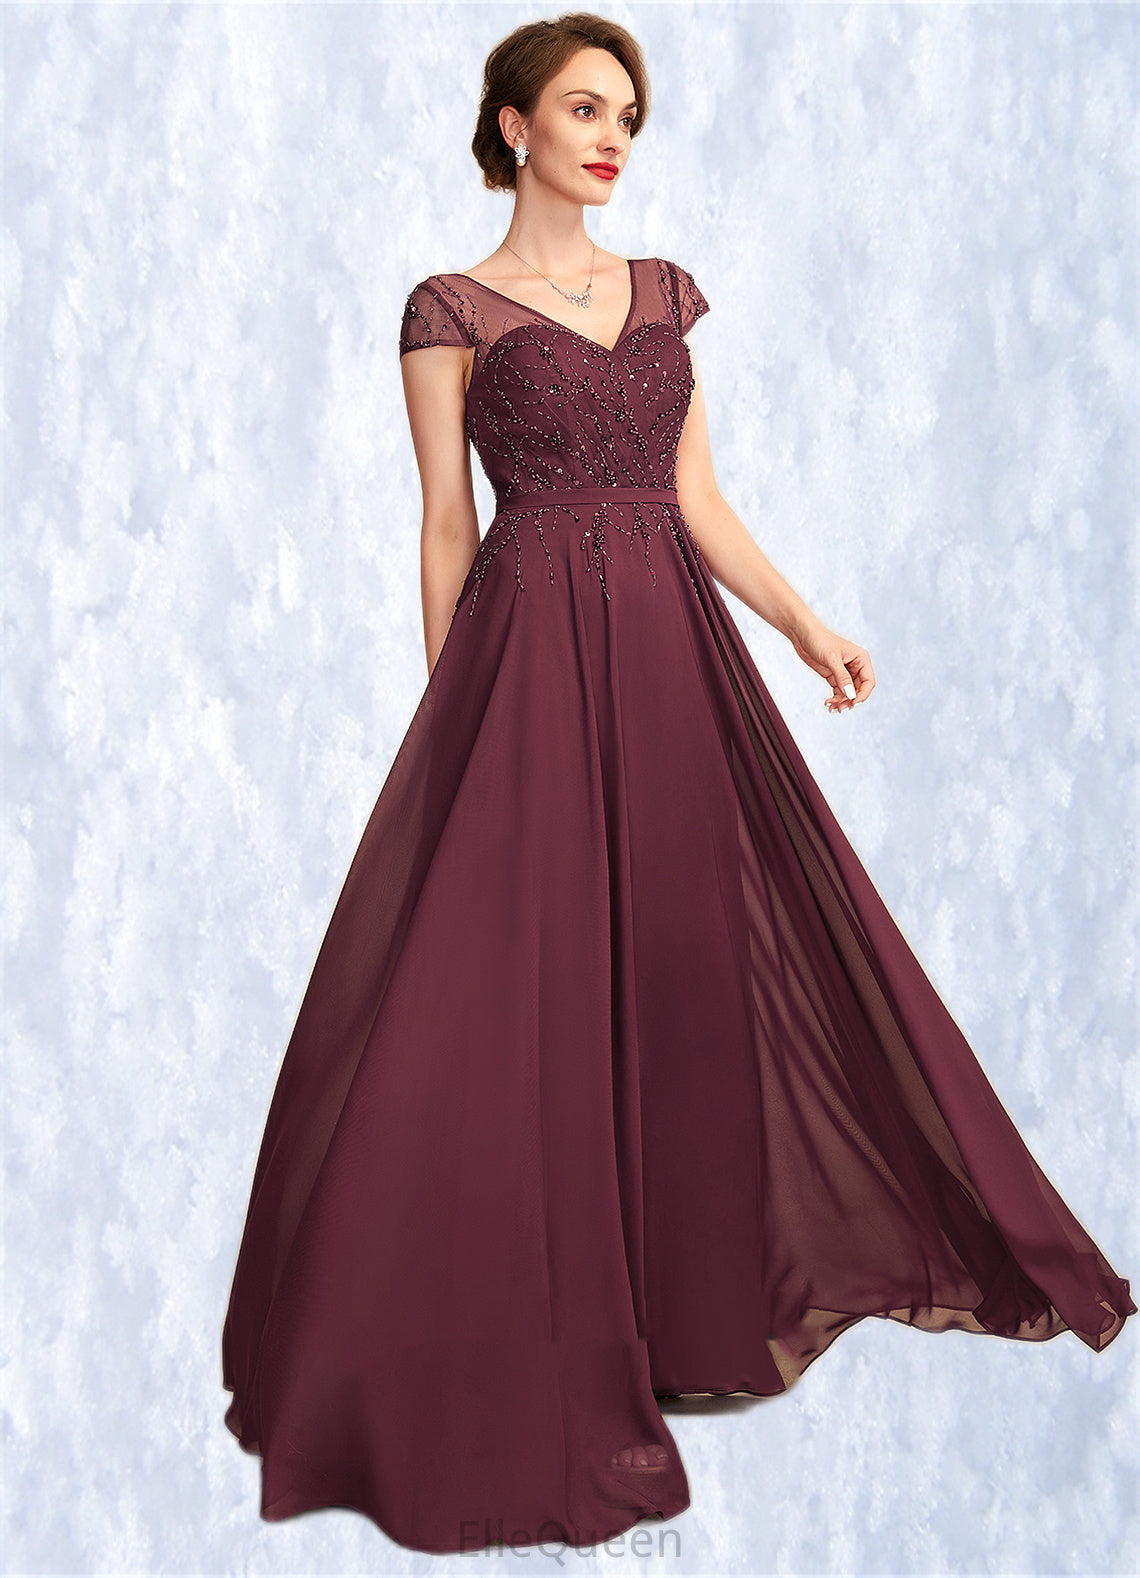 Laney A-Line V-neck Floor-Length Chiffon Mother of the Bride Dress With Beading Sequins DG126P0015028